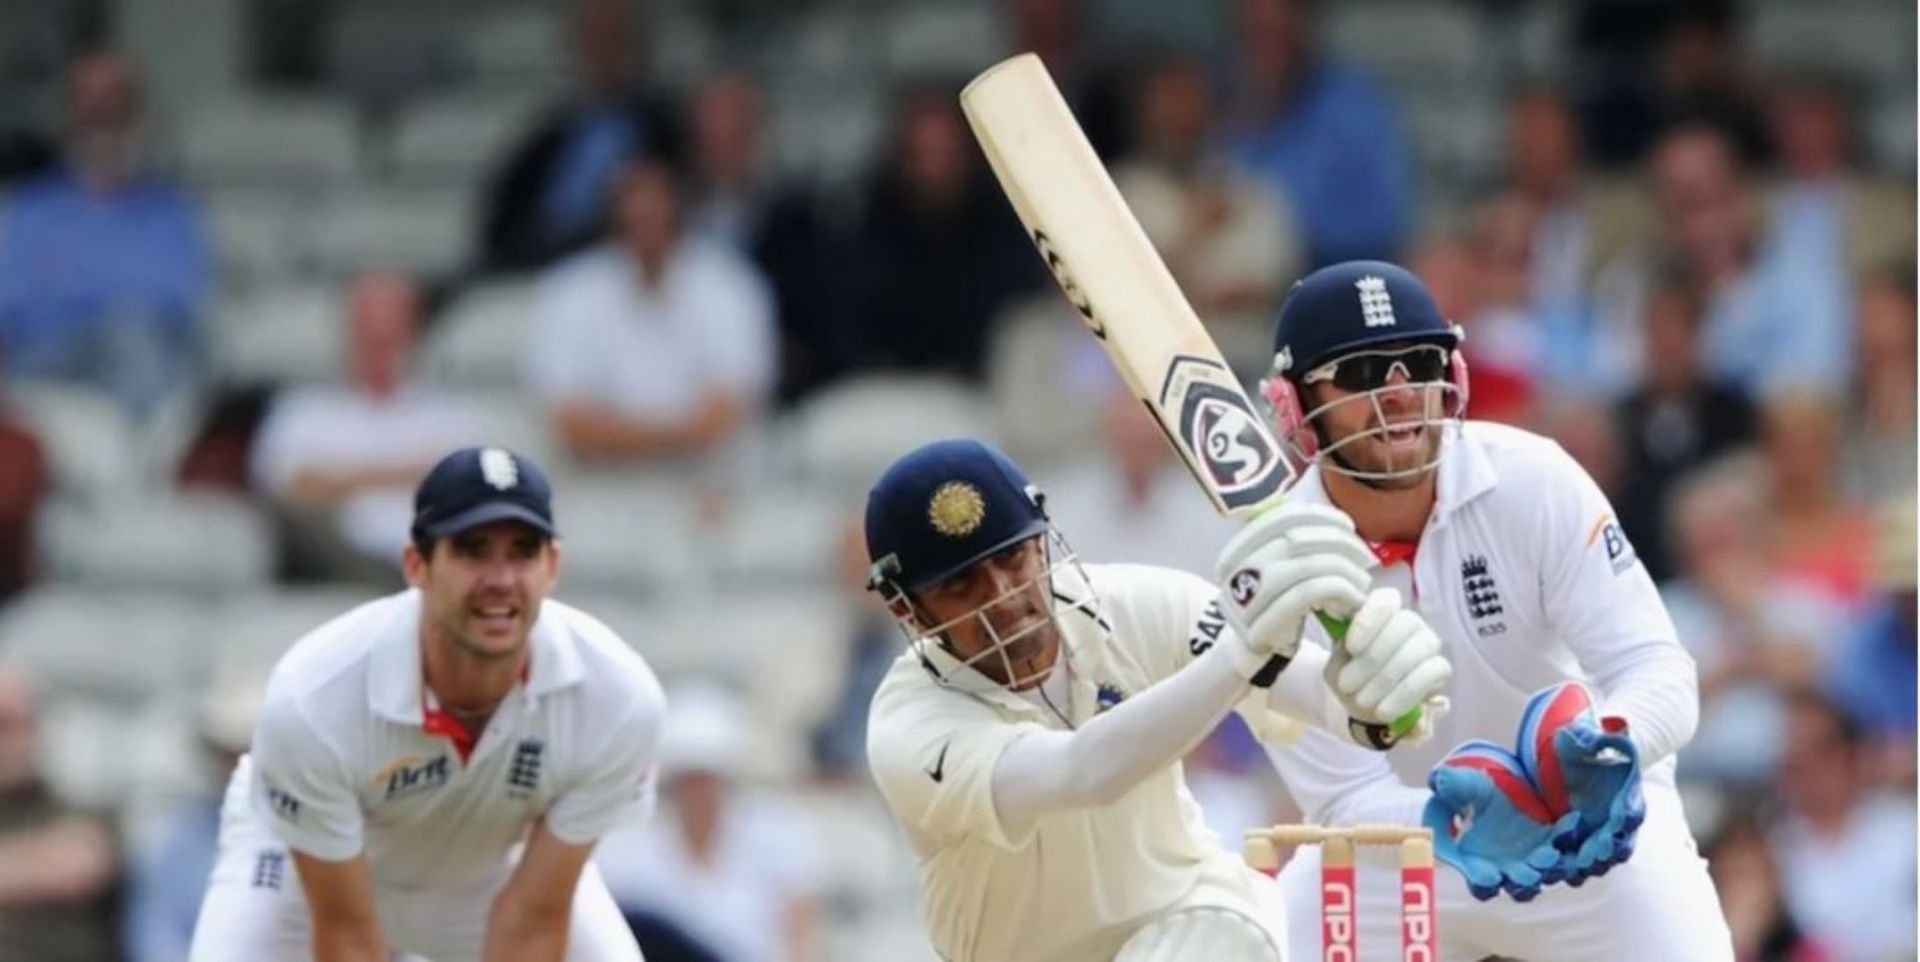 Rahul Dravid smashed a century in all but one match in the 2011 England Test series.